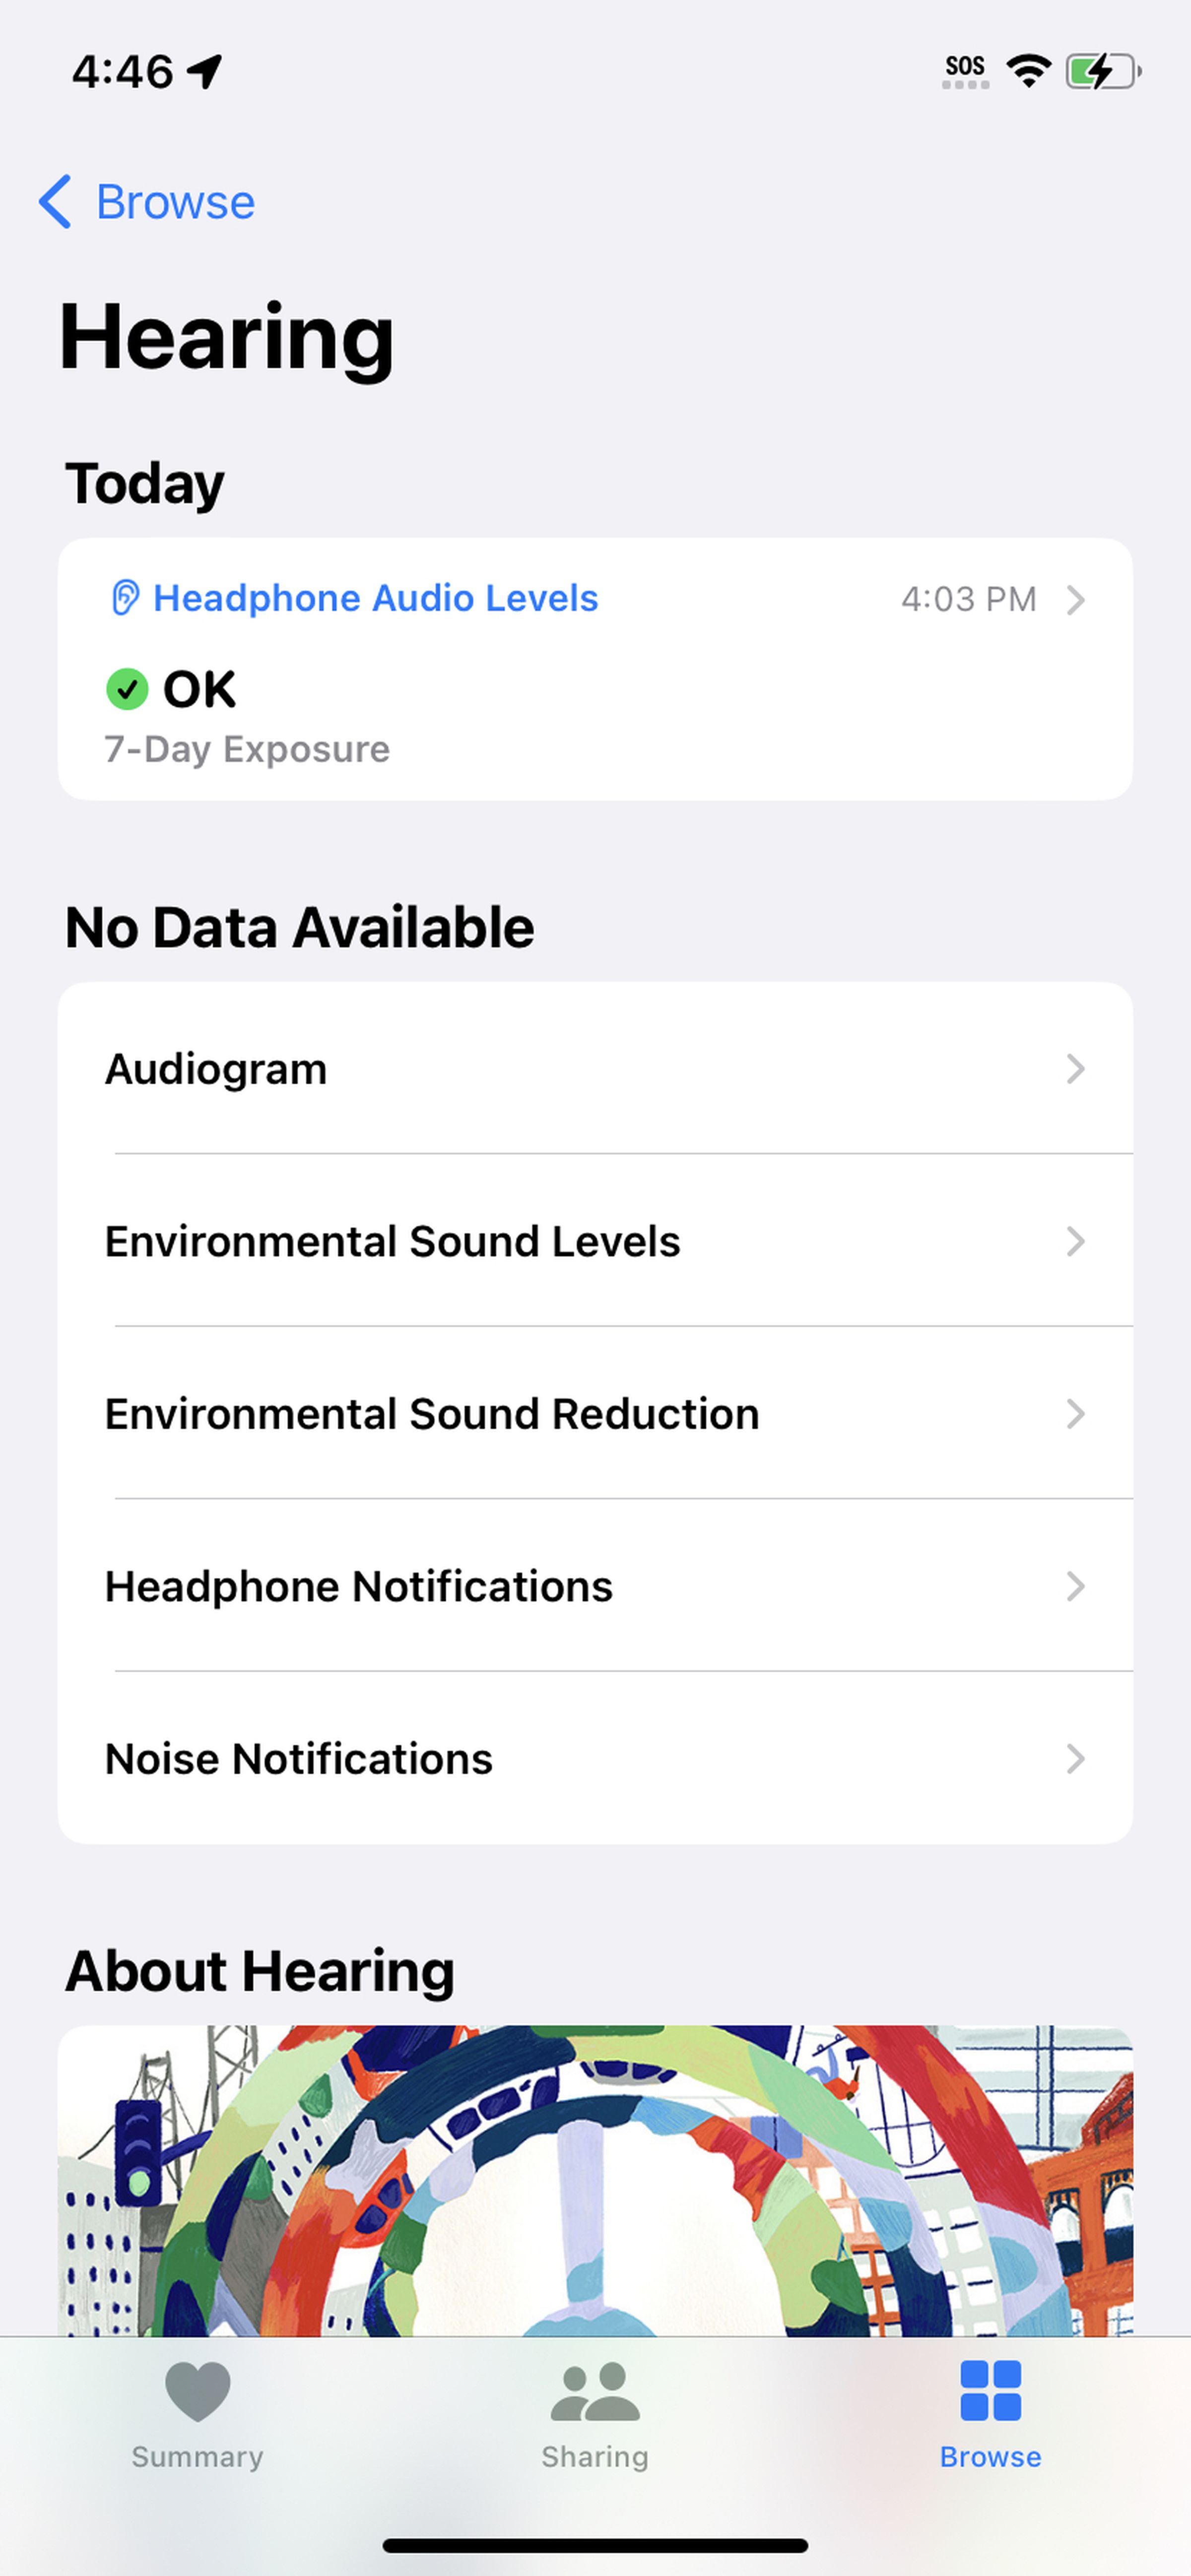 The Hearing page in the Health app.